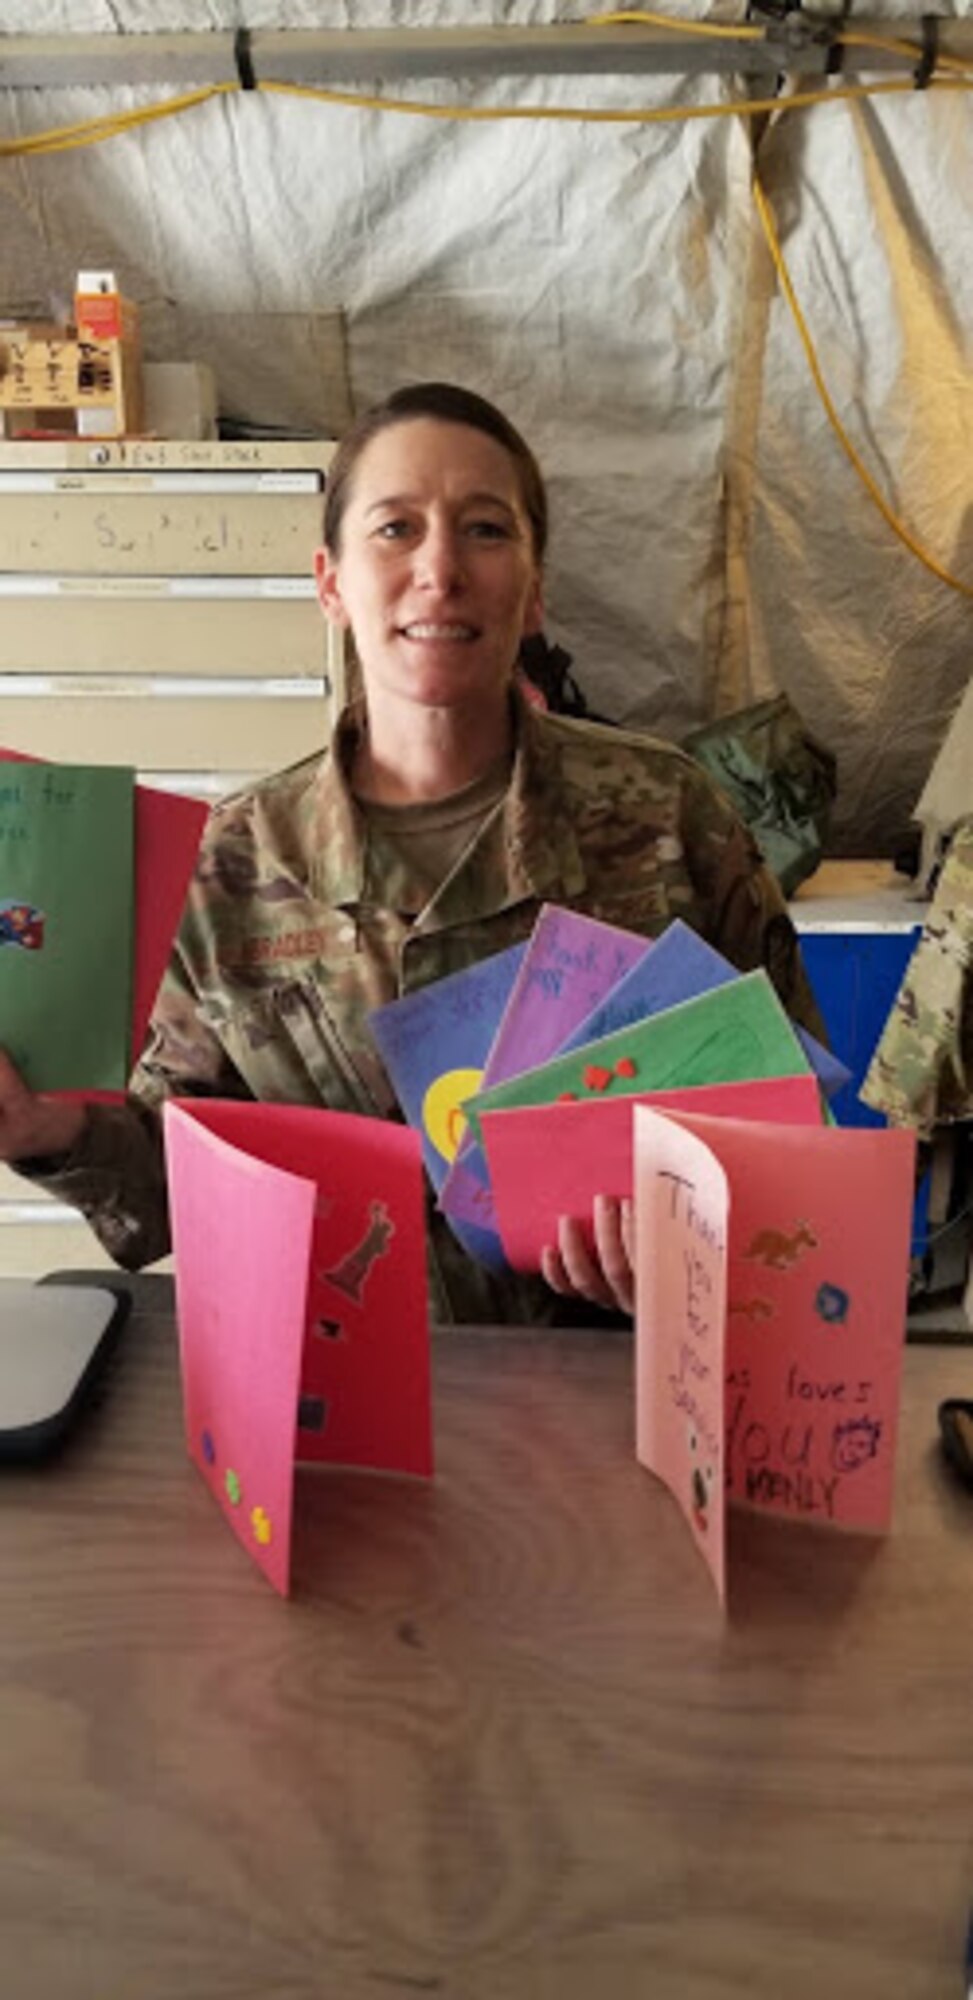 Senior Airman Jayme Bradley, an electrical and environmental specialist for the 175th Maintenance Squadron, Maryland National Guard, poses with cards sent to her from her home church April 8, 2019 during her deployment to Kandahar, Afghanistan.